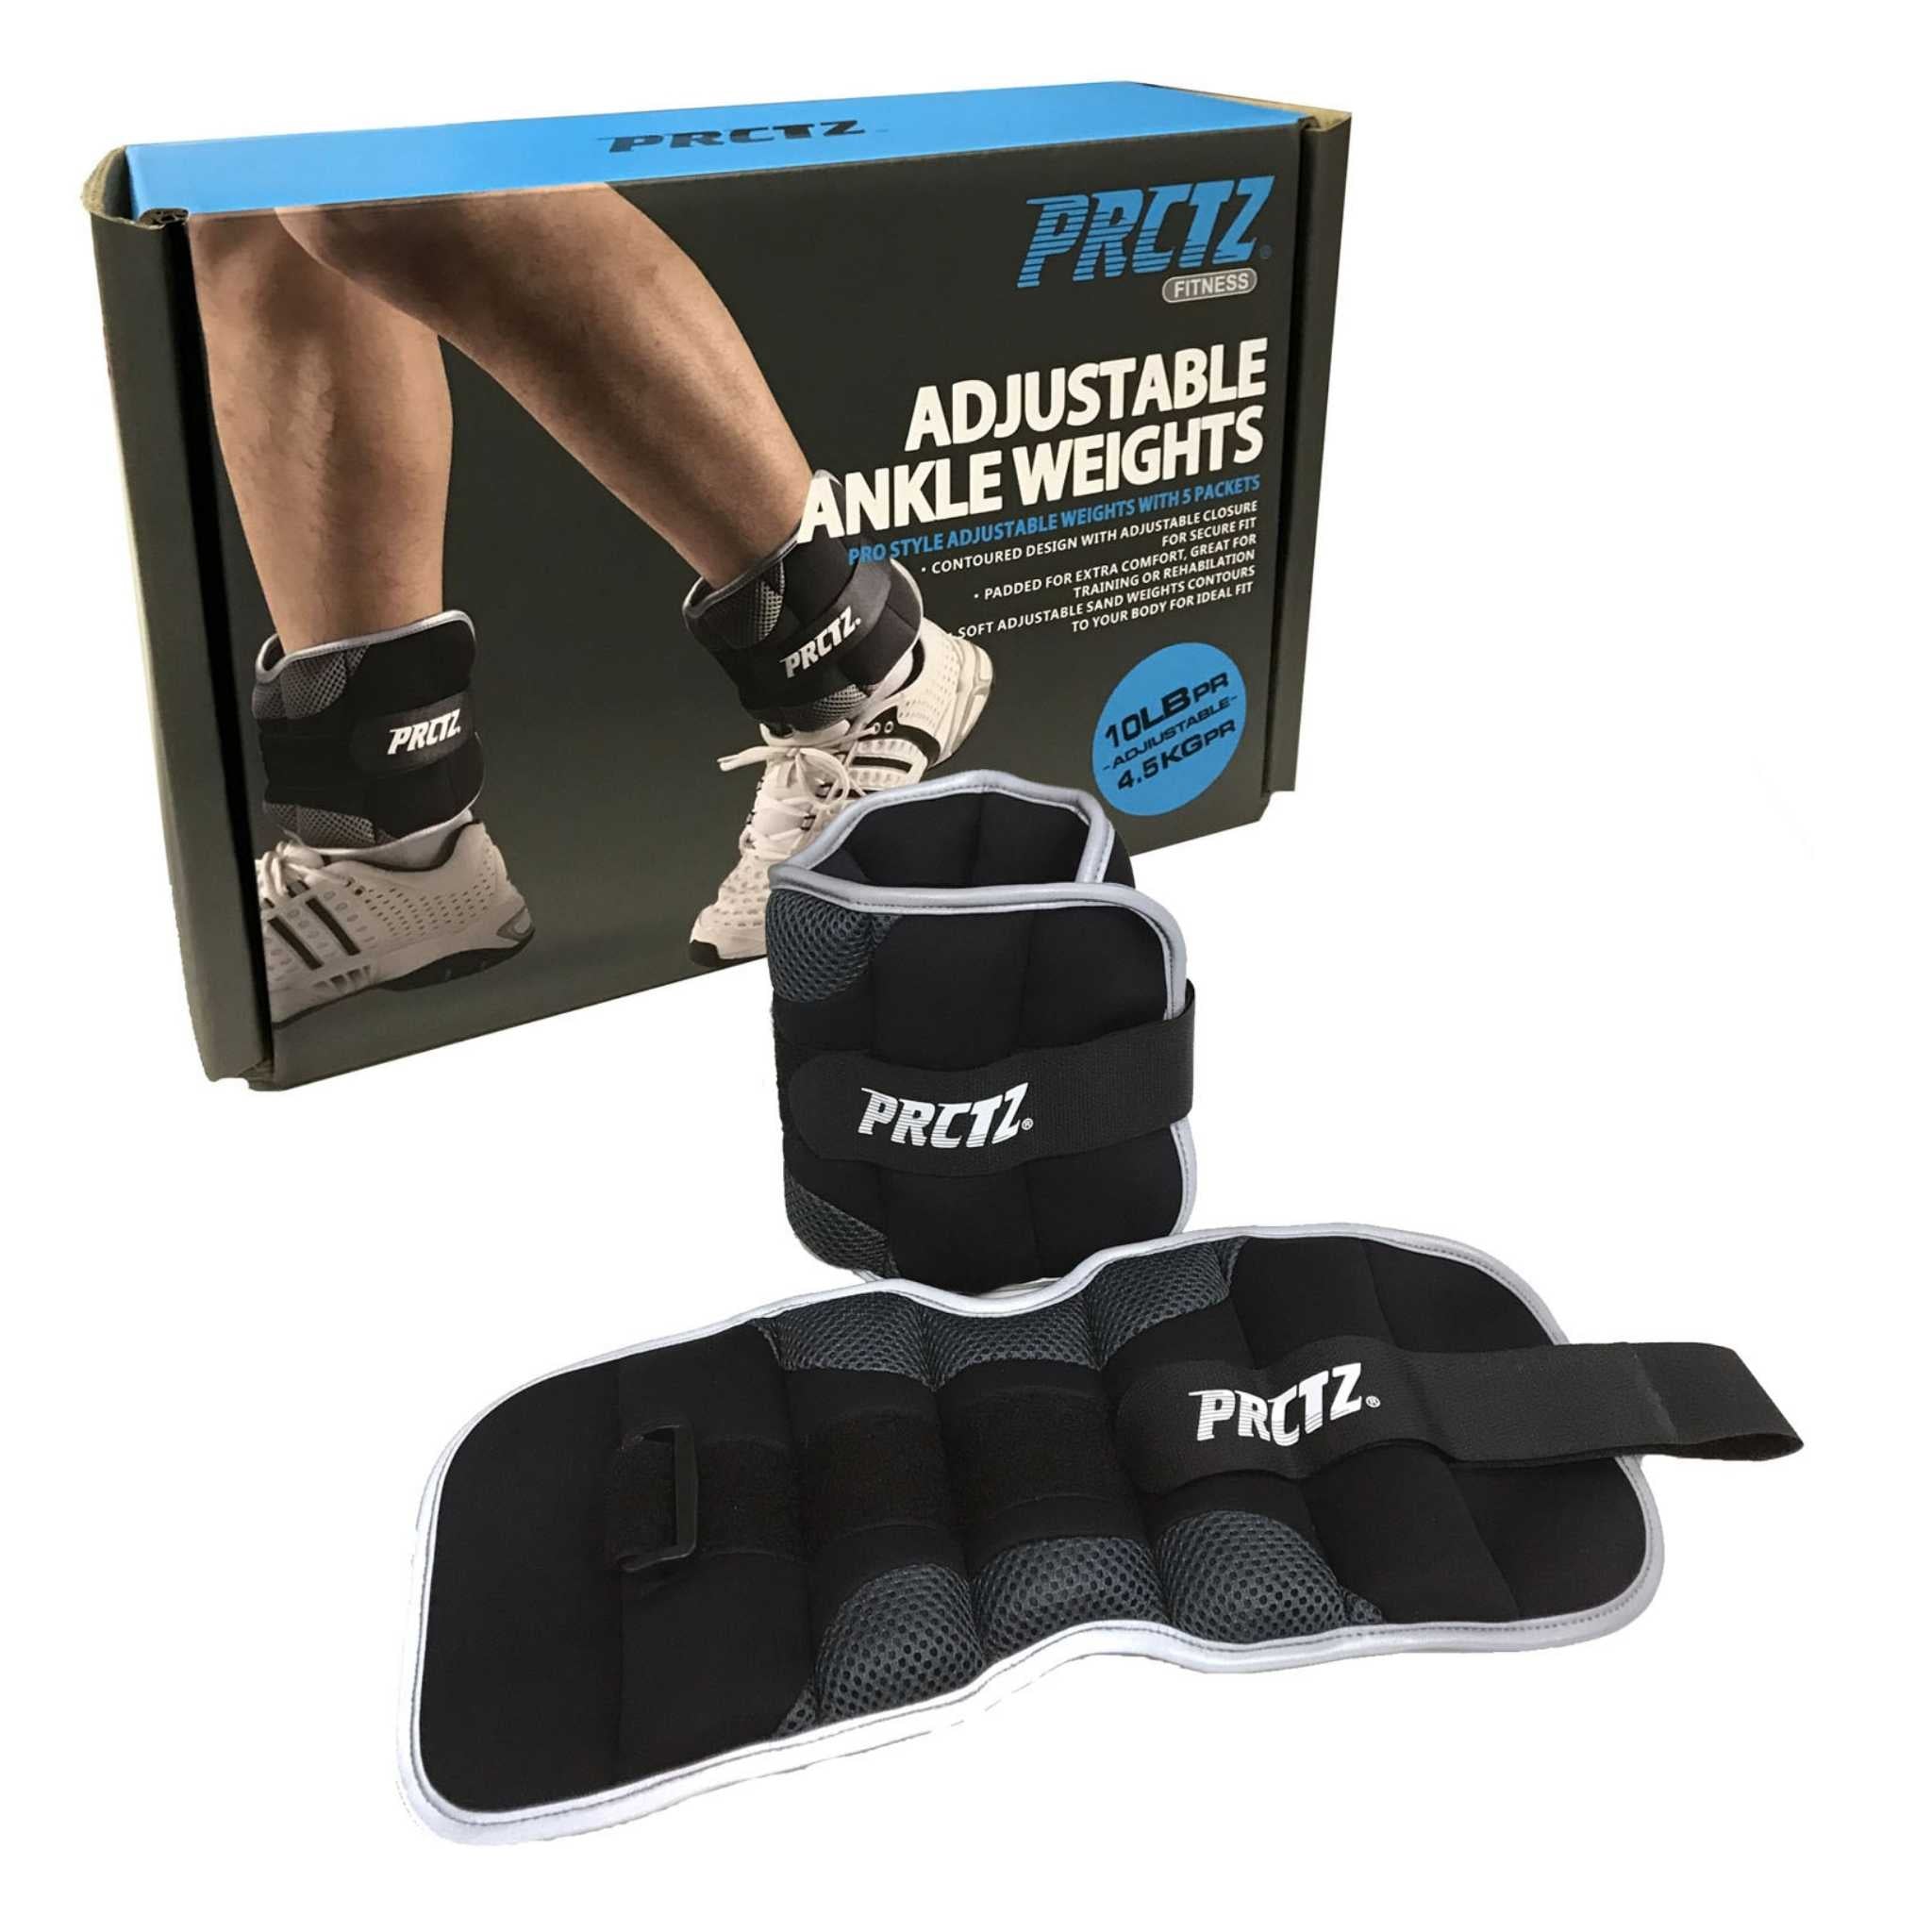 Adjustable Ankle Weights, 10 lb. Pair (2 x 5 lbs.)